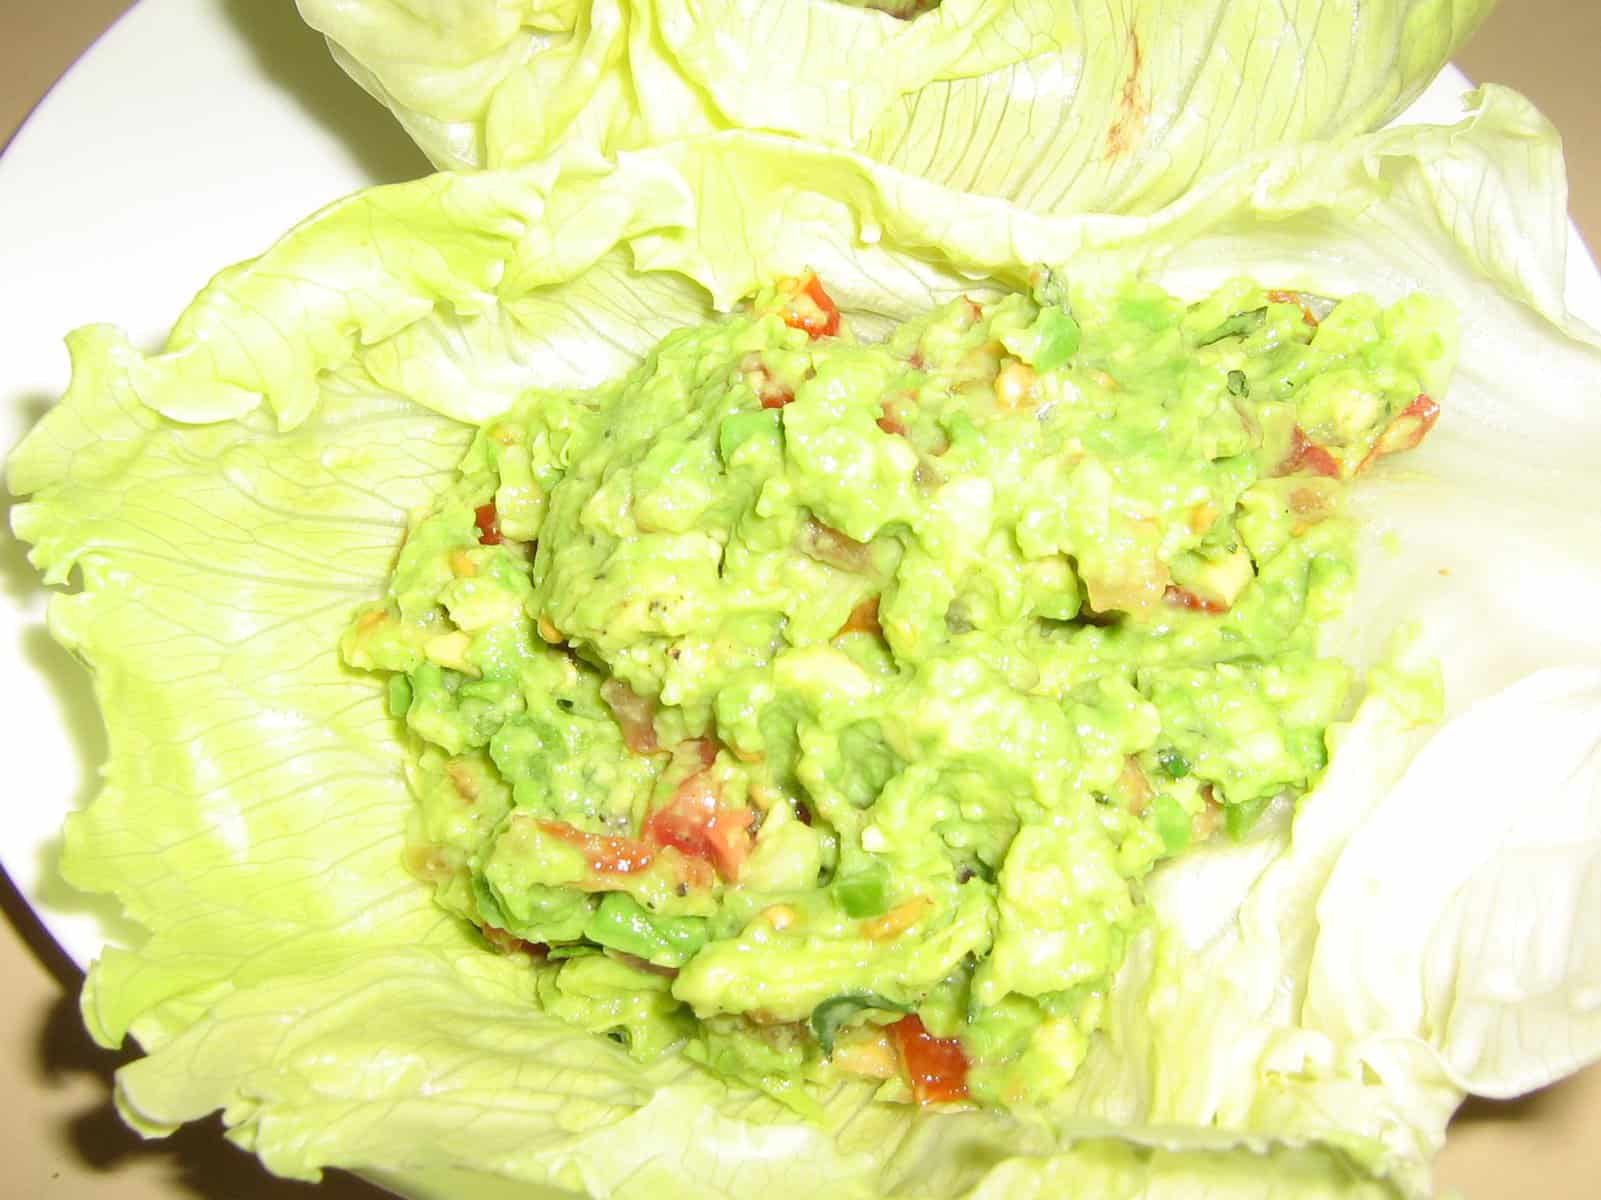  Savor the freshness of summer with these Avocado Salad Lettuce Wraps!